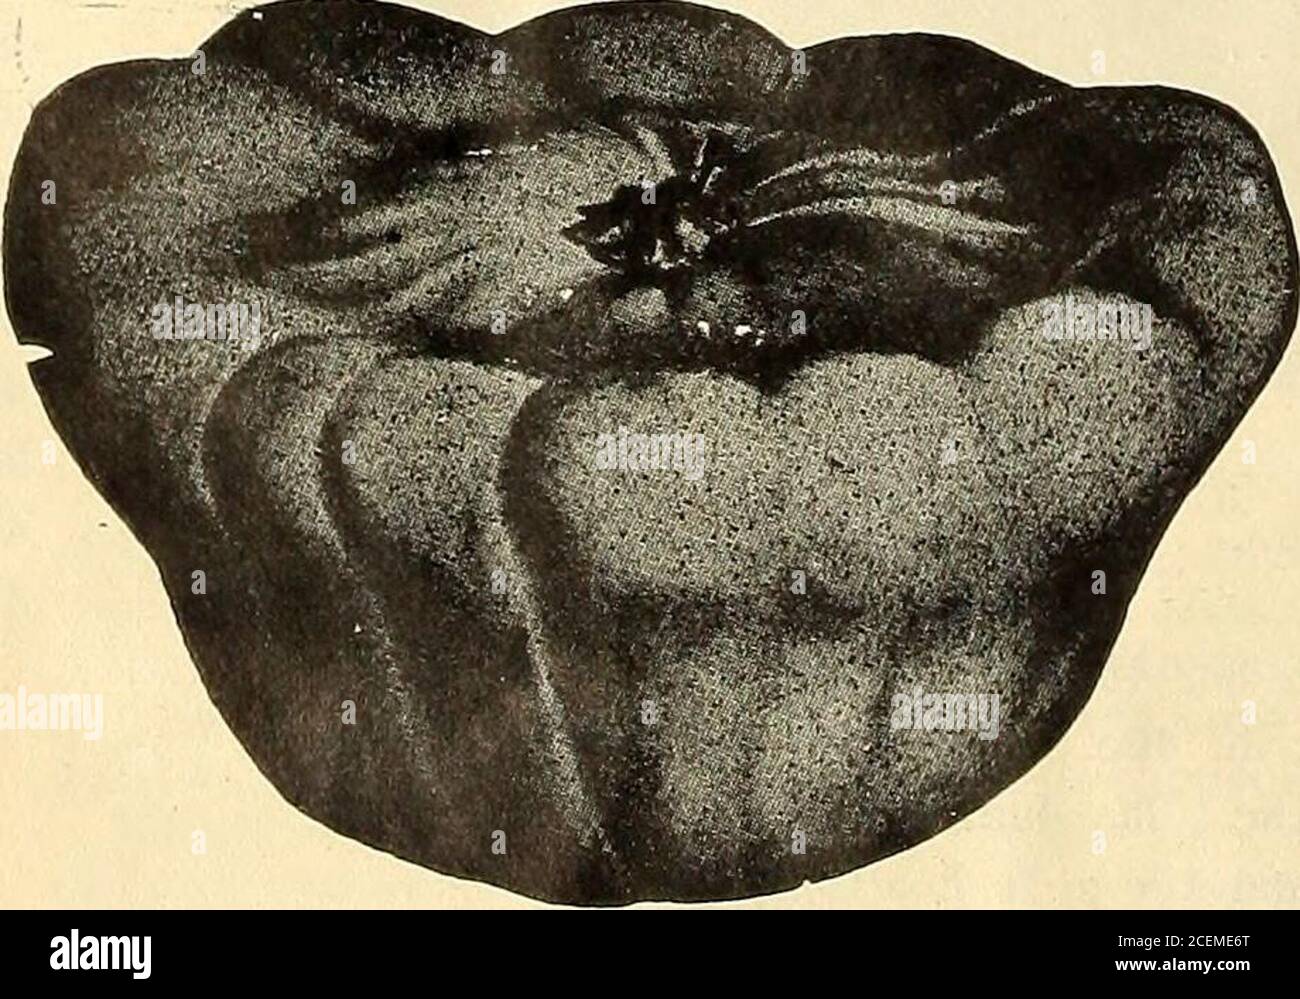 . F. W. Bolgiano & Co. : seed importers and growers. d 10c.; % lb., 15c; lb., 40c. EARLY YELLOW SUMMER CROOKNECK.—A de-sirable table sort, very early and productive, fruits whenmatured, small, yellow crooknecked, and covered withwarty excrescences. Packets, 5 and 10c.; % lb., 15c.;% lb., 25c.; lb., 40c. HUBBARD SQUASH.—A superior variety and one of the best winter keepers, flesh bright orange-yellow, finegrained, very dry, sweet and rich flavored. Bakes very dry, equally as dry as the Sweet Potato. Our stock is thevery best and we dont hesitate to recommend it to the most critical planter. Pac Stock Photo